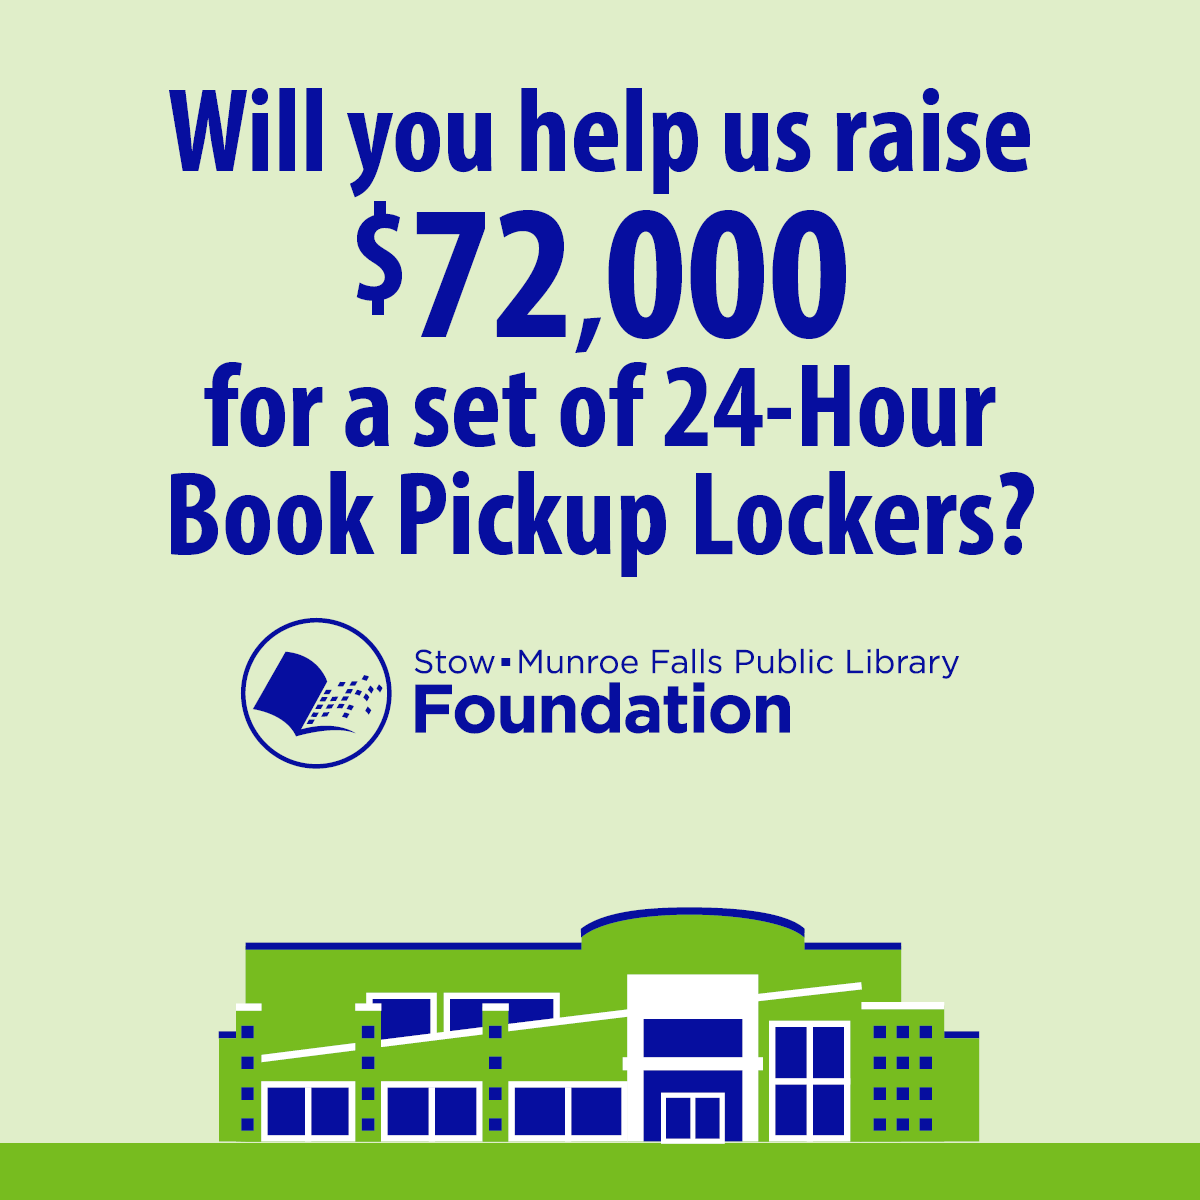 Will you help us raise $72,000 for a set of 24-Hour Book Pickup Lockers?